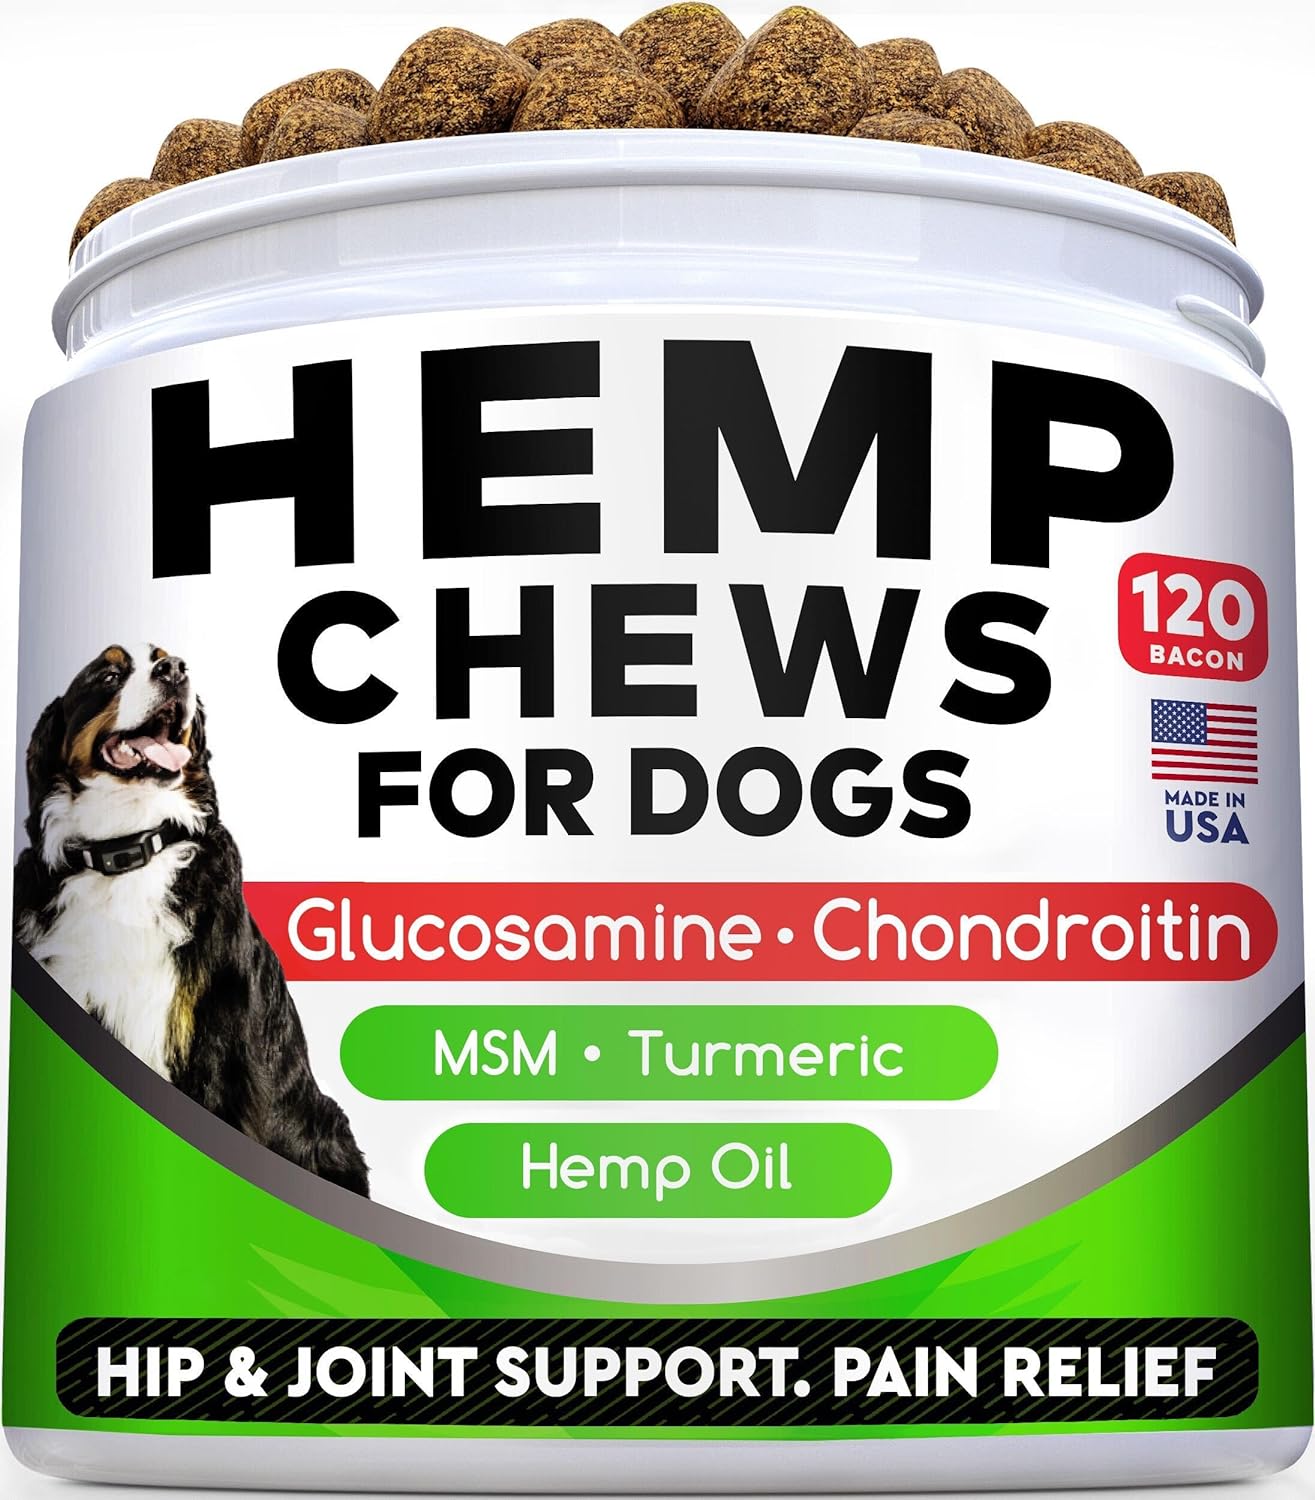 Hemp Chews for Dogs - Glucosamine Chondroitin for Dogs Joint Pain Relief with Hemp Oil, Hip & Joint Supplement Dogs, MSM Turmeric for Dogs Mobility, Dog Joint Supplement, Hemp Dog Treats Joints Health